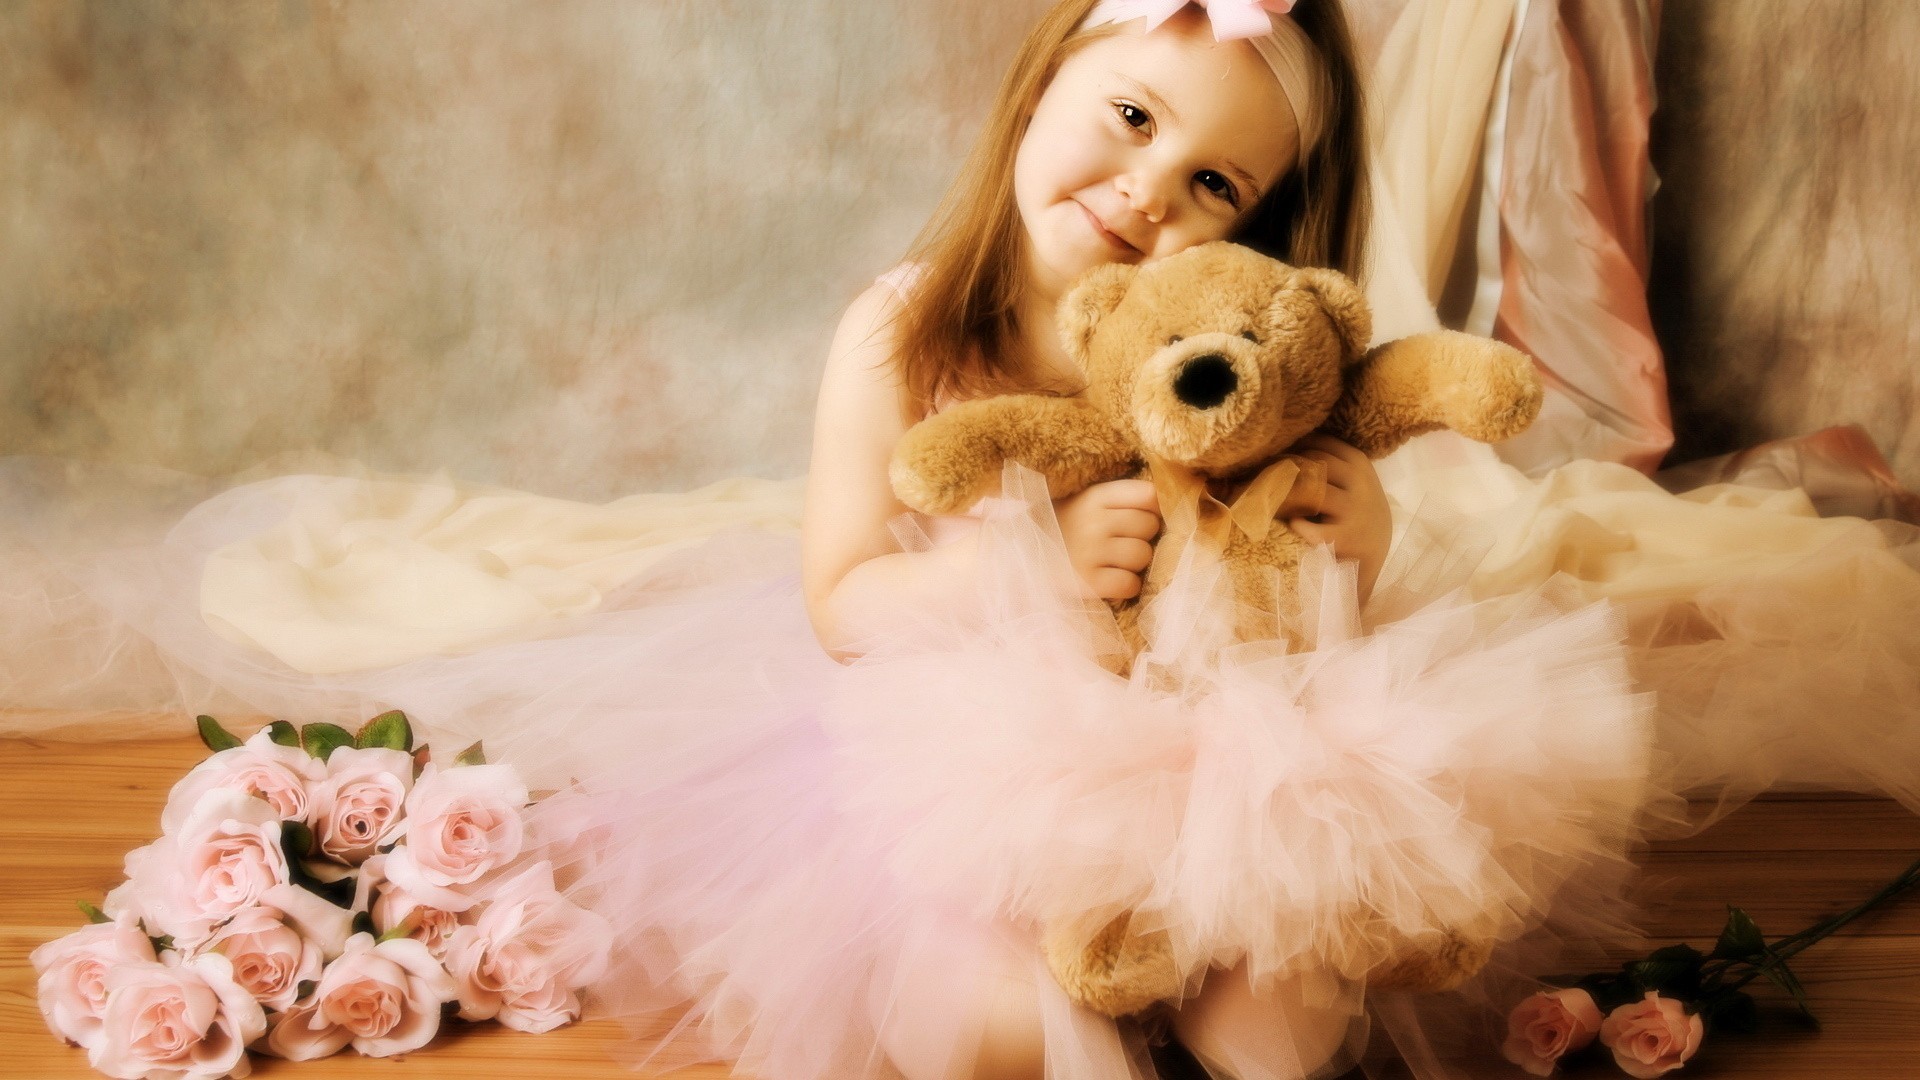 1920x1080 IMAGE WORLD: Cute Teddy Bear Beautiful Collection Pictures 1920Ã1080 Taddy  Bear Image Wallpapers